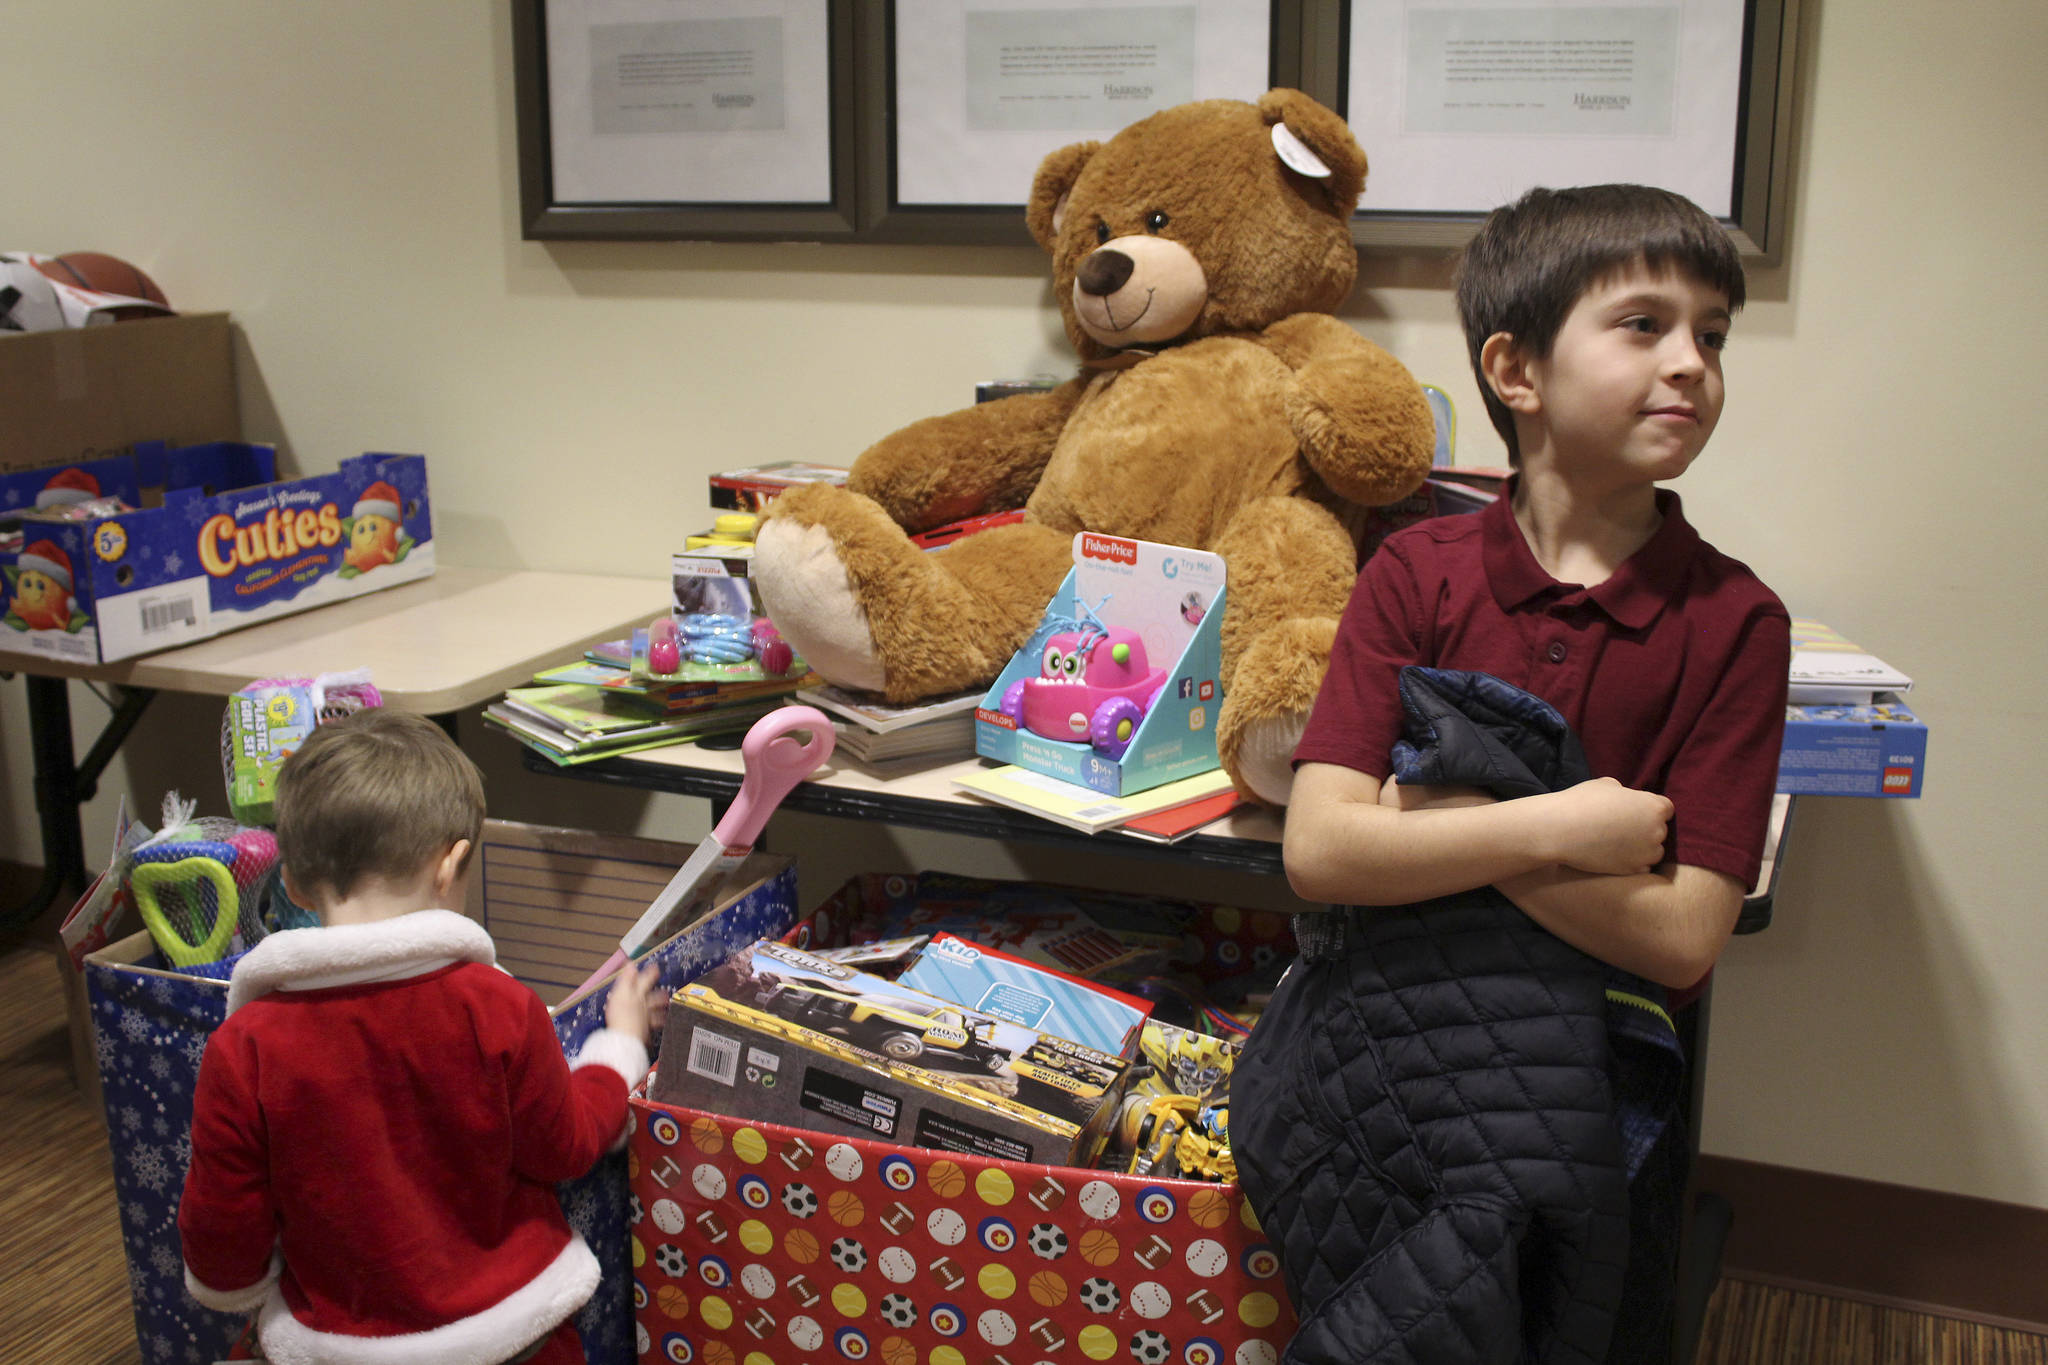 Zachary Darner founded Kidzz Helping Kidzz to collect donations of toys for gifting to children in three area hospitals. This year, the group collected and delivered more than 1,500 toys. (Courtesy photos)